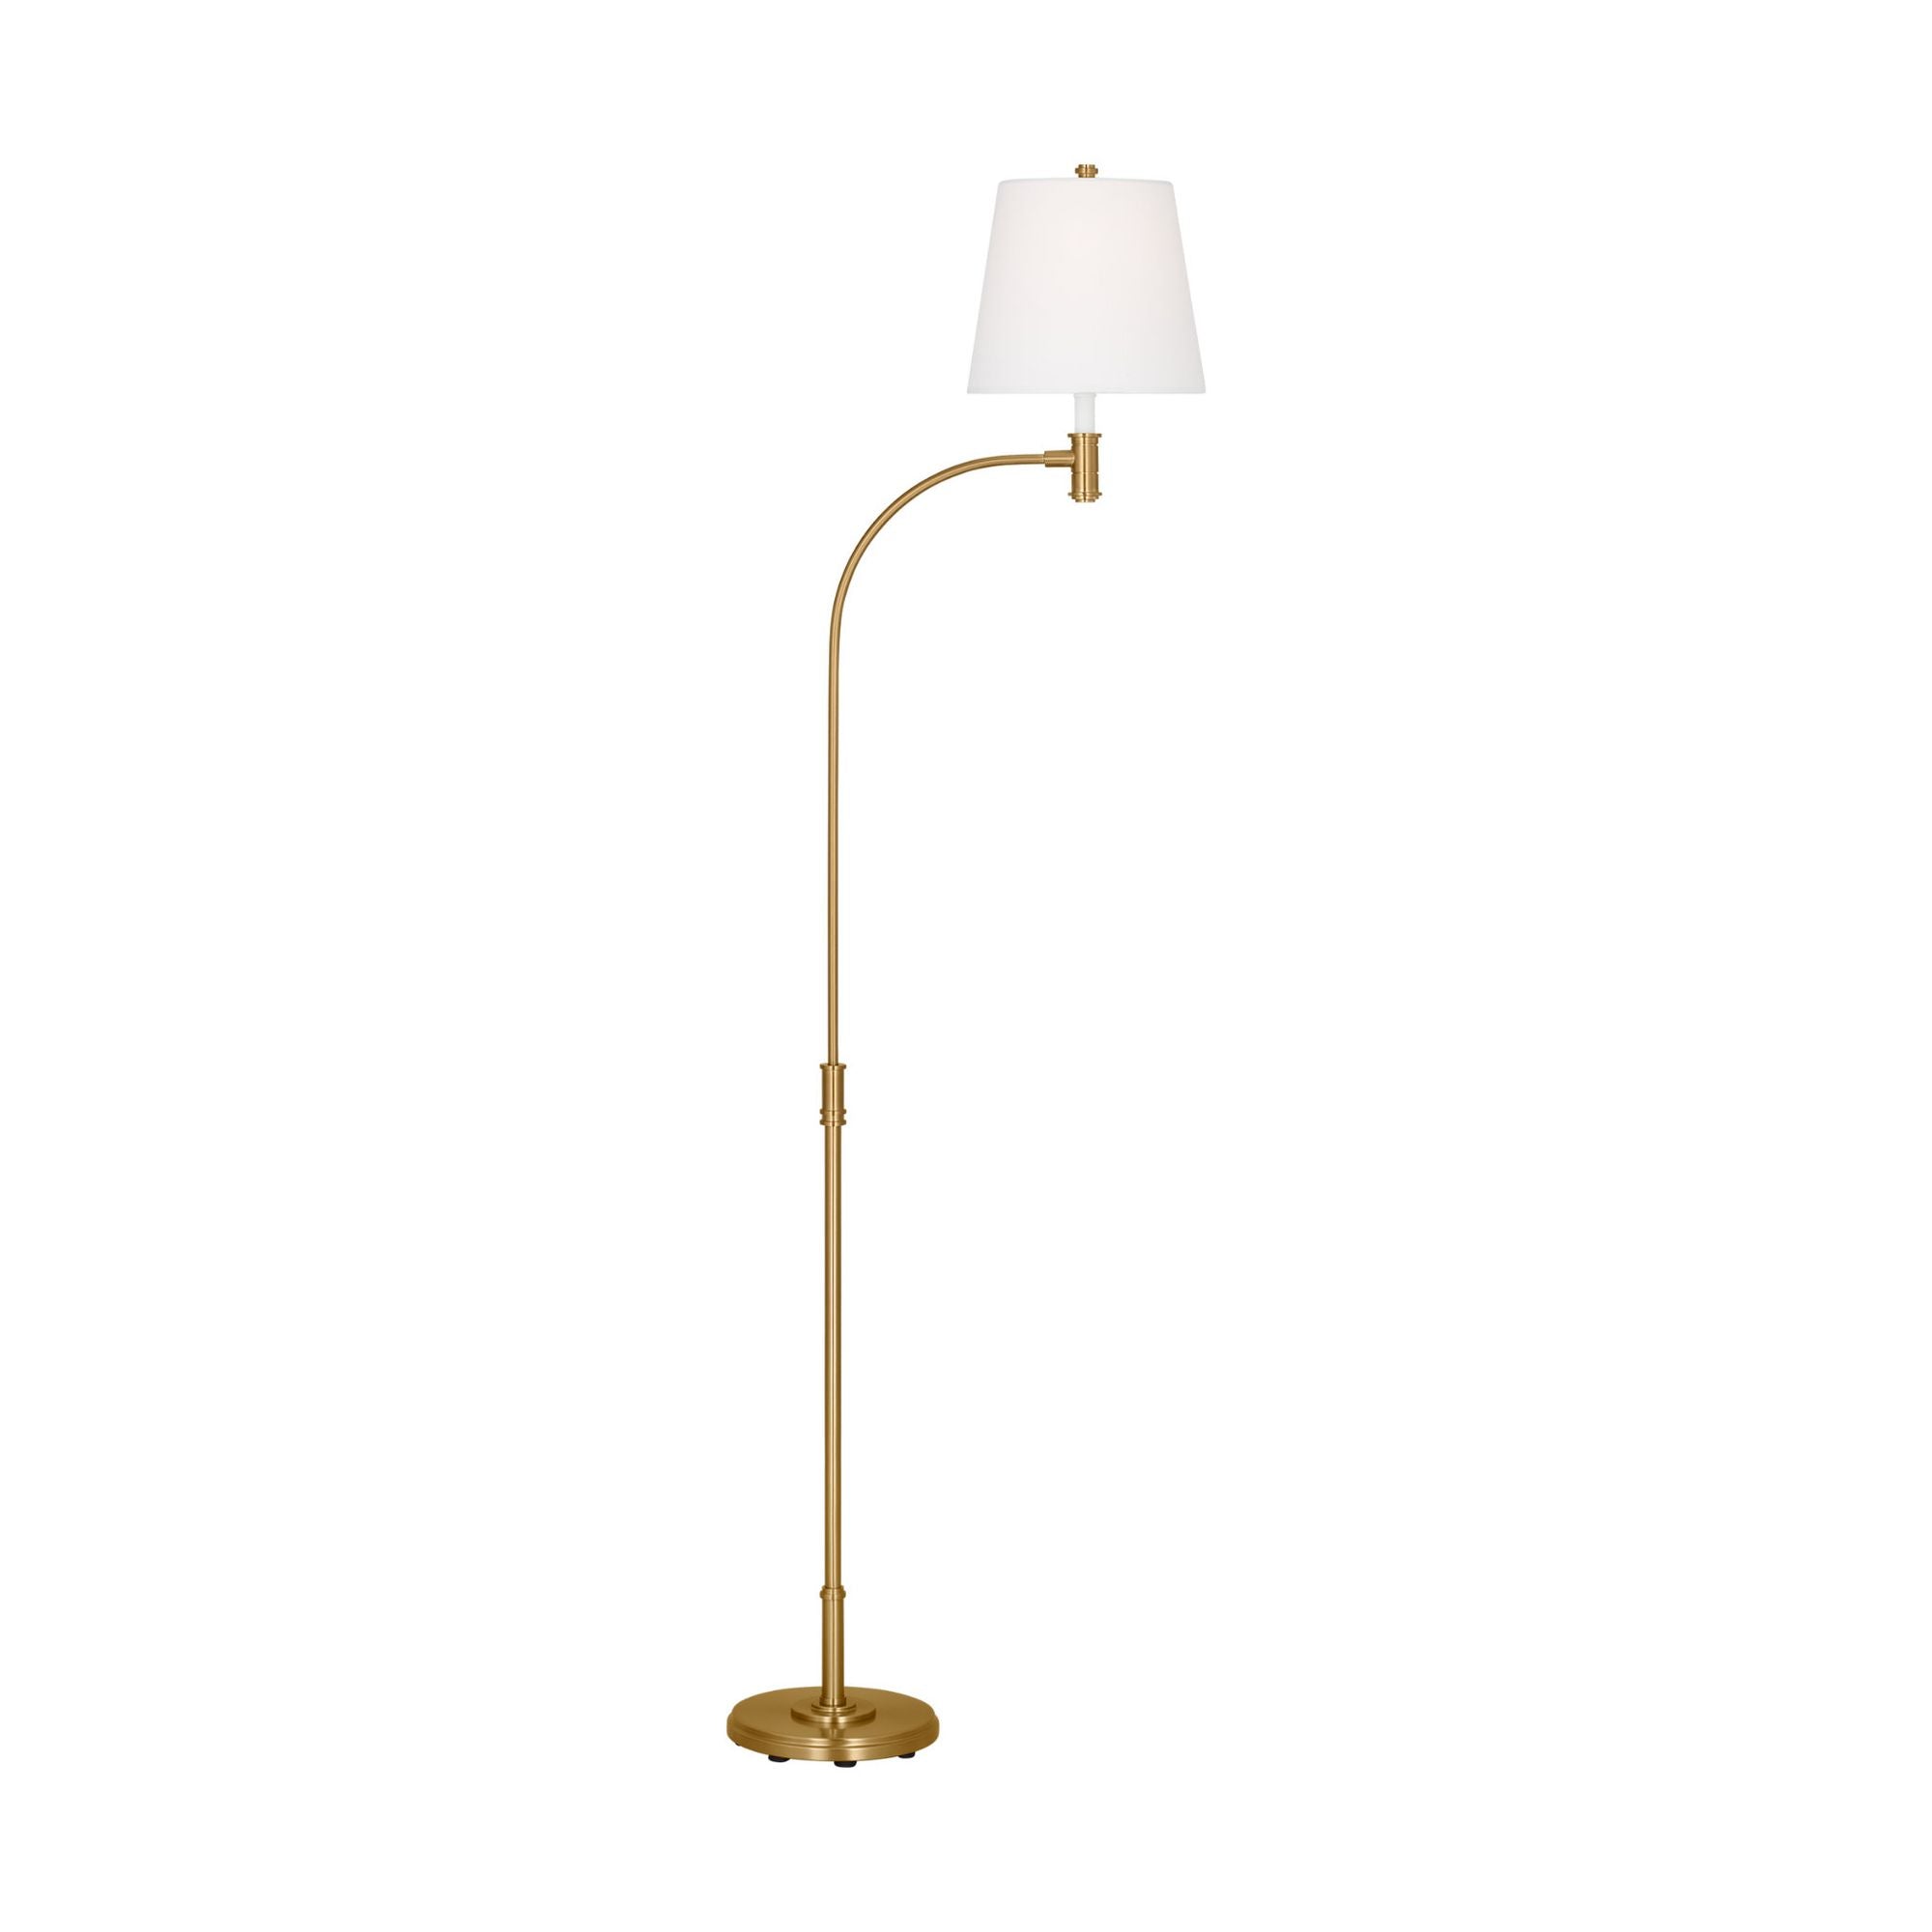 Chapman & Myers Belmont Extra Large Task Floor Lamp in Burnished Brass